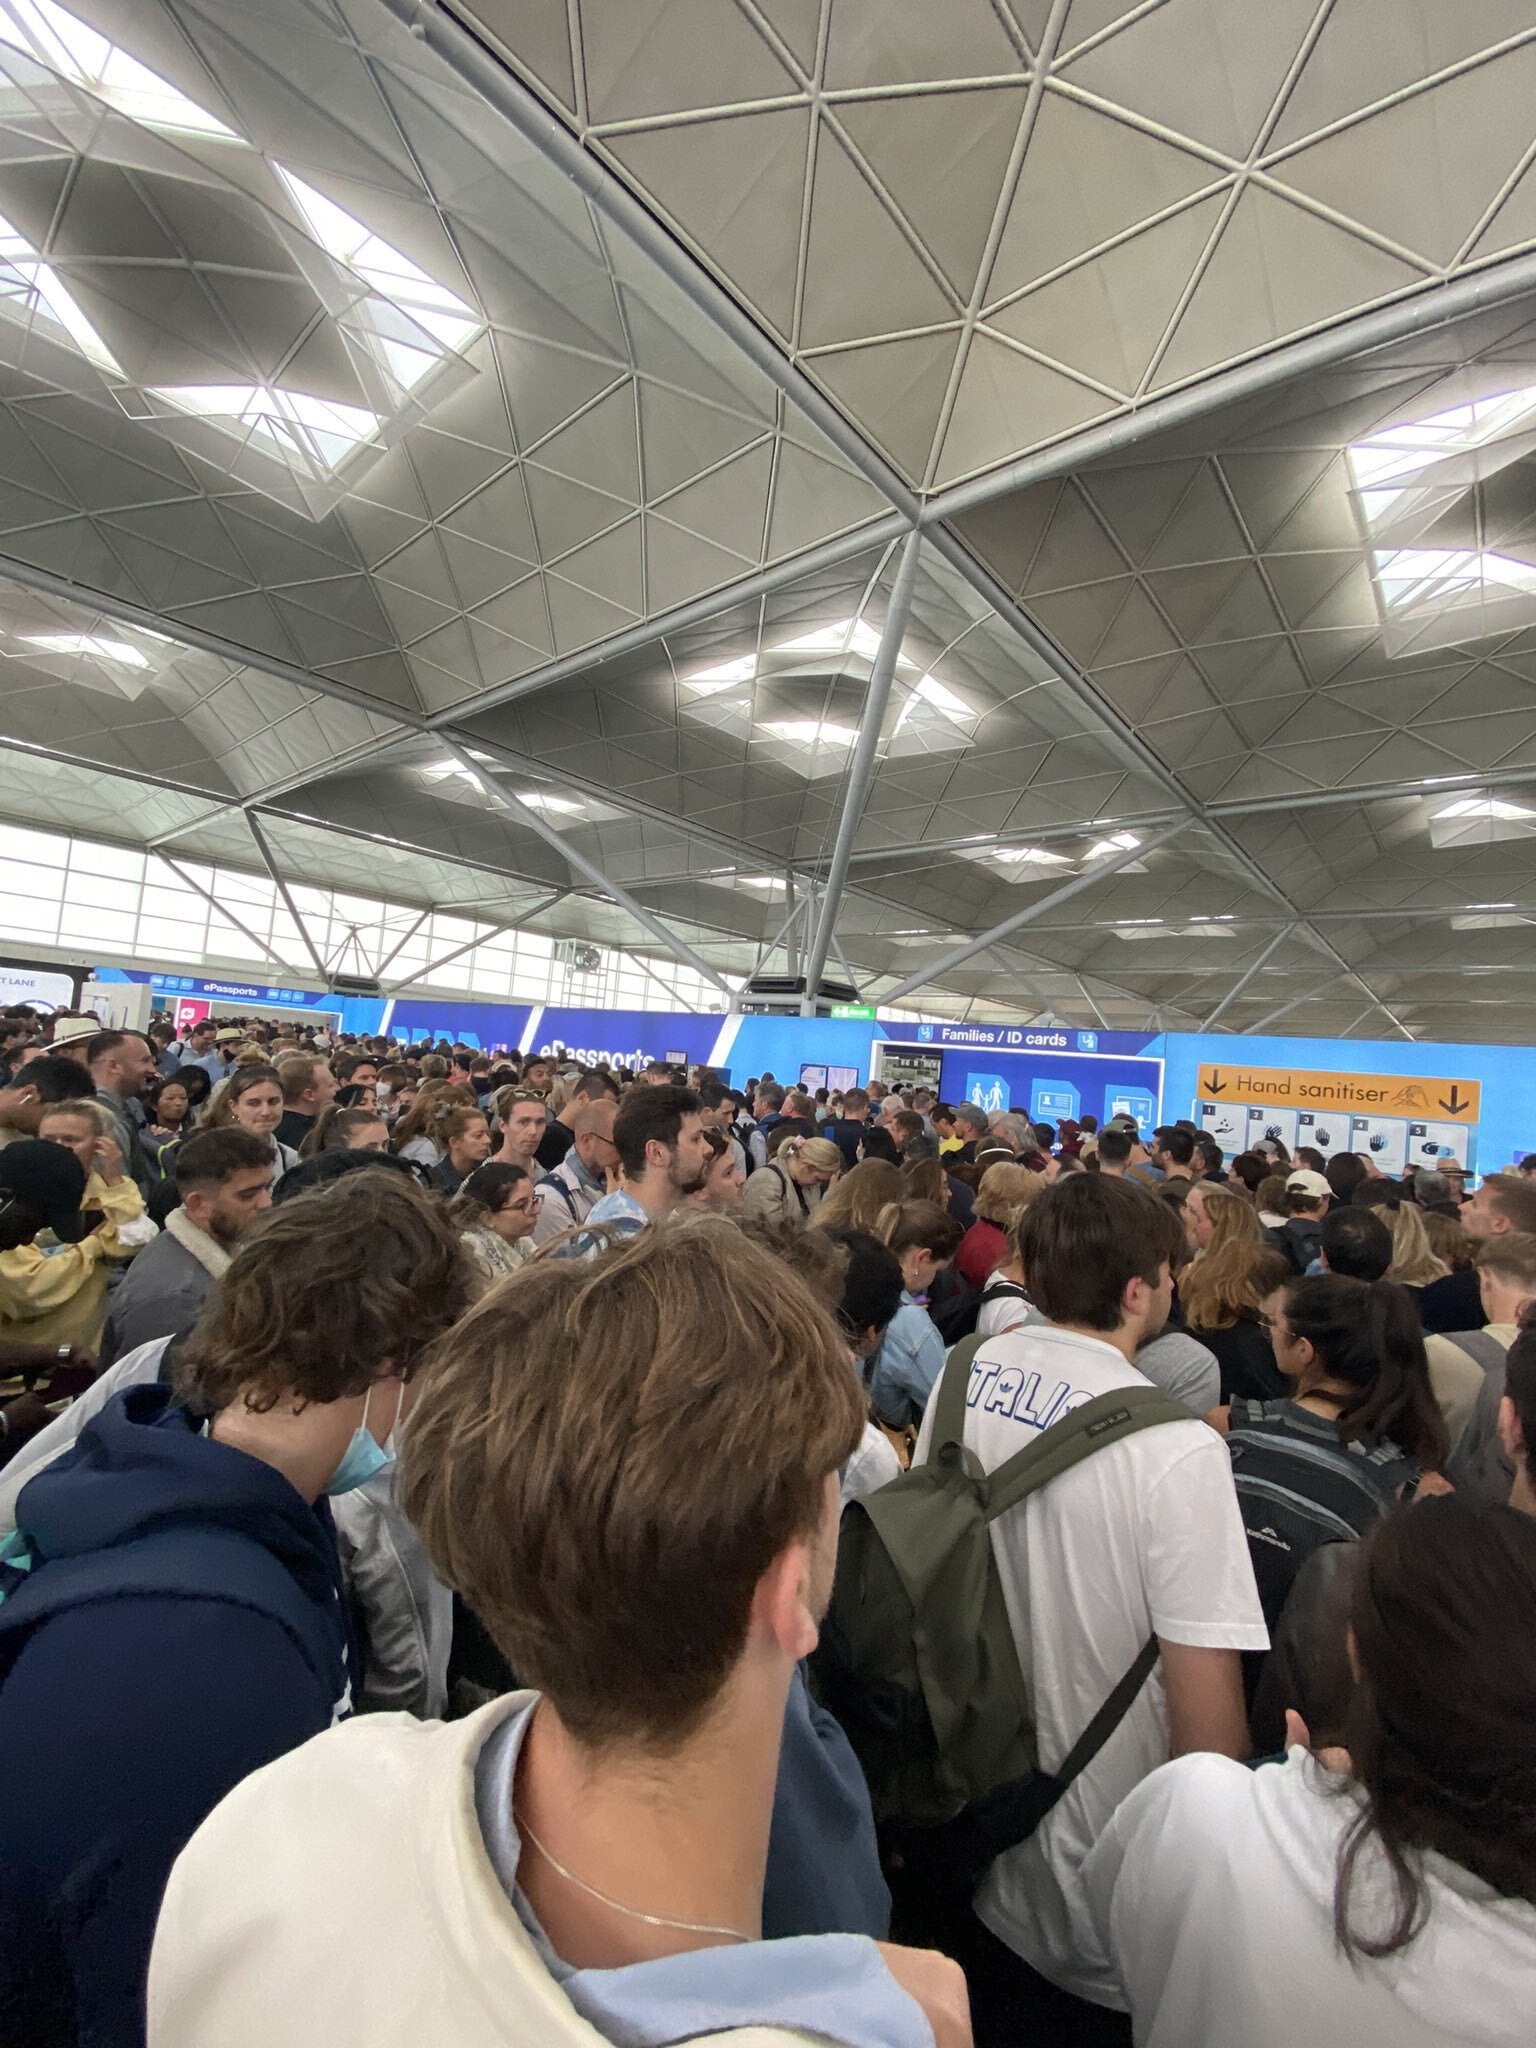 People queuing at Stansted airport (@CJvsn)